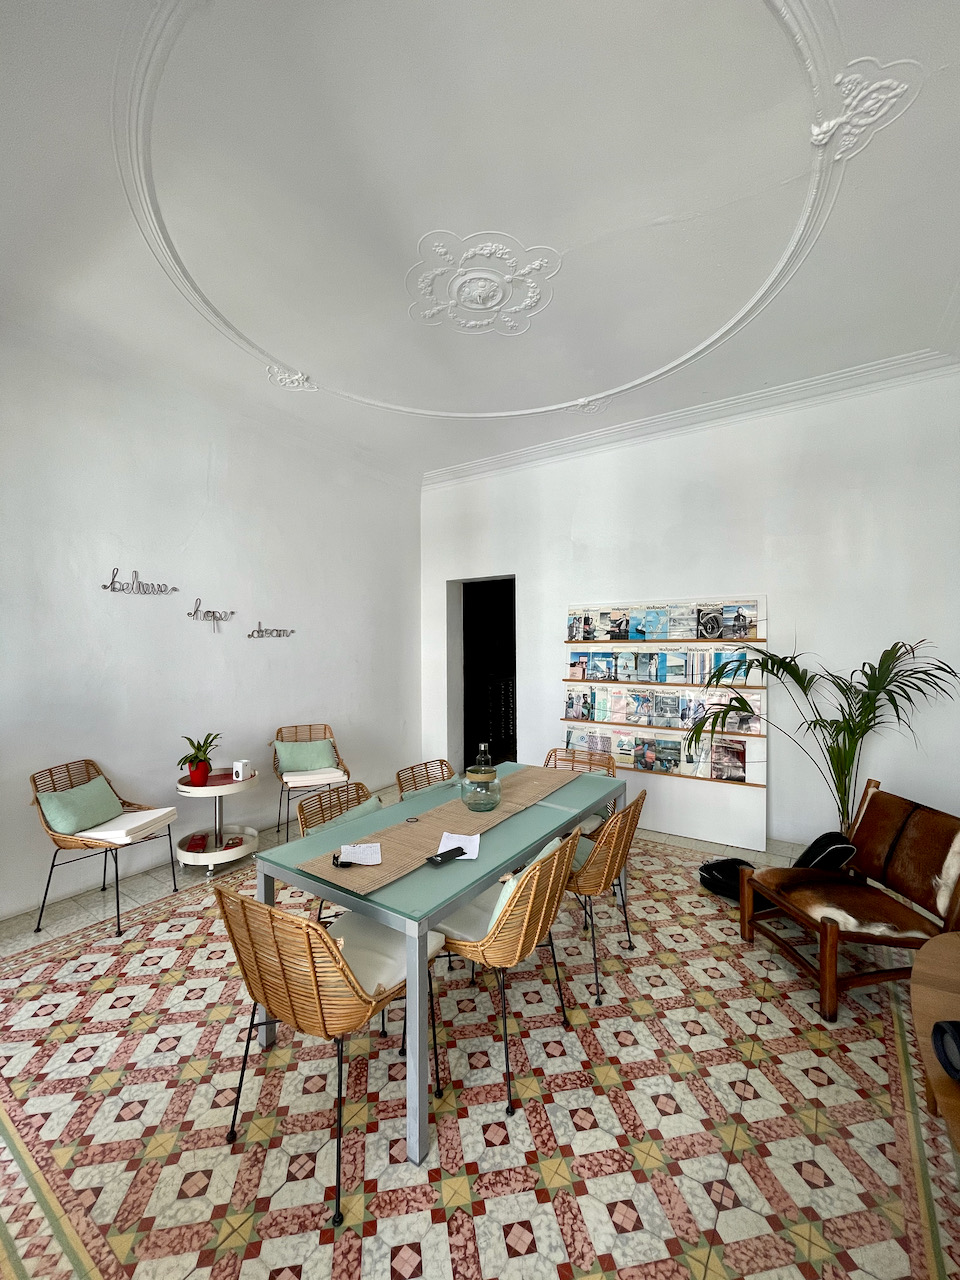 Elegant and luminous home with own courtyard in the Old Town of Palma de Mallorca.